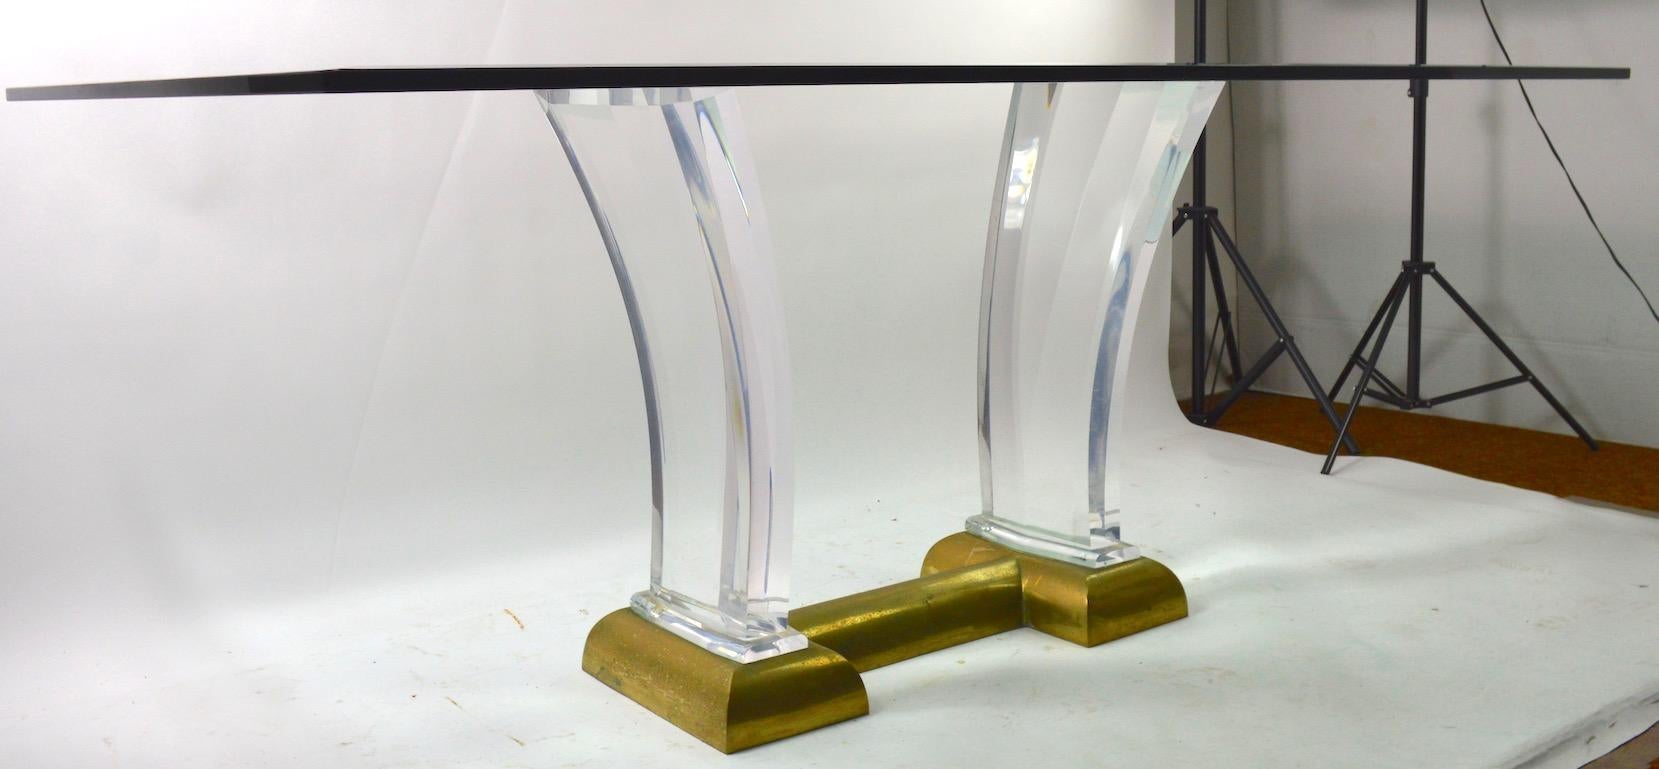 Large Lucite Brass and Glass Dining Table by Jeffrey Bigelow For Sale 6